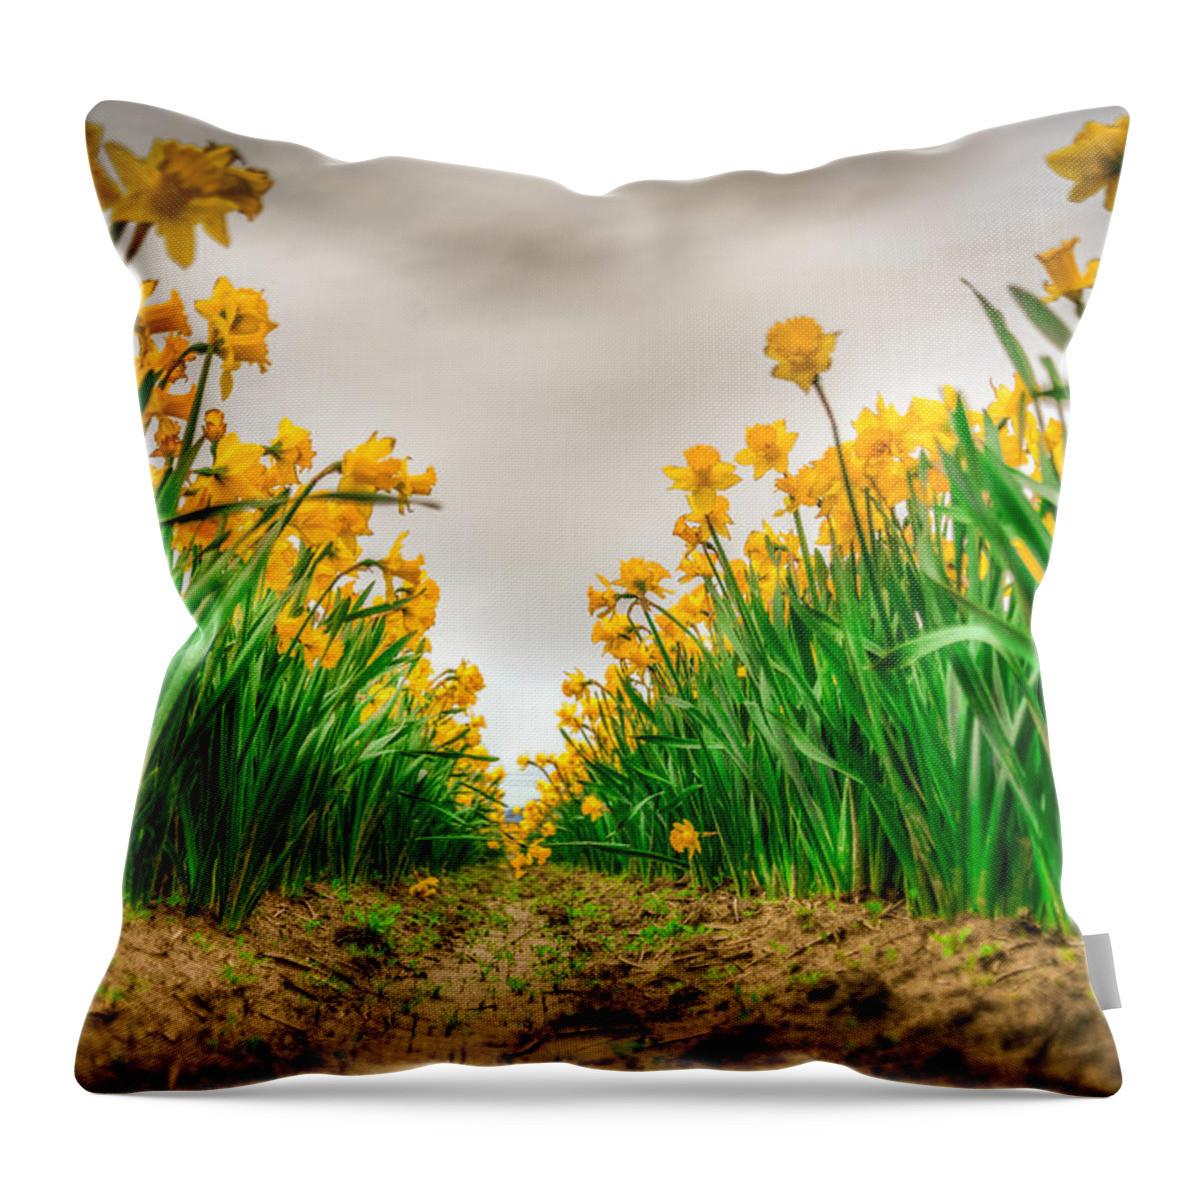 Daffodil Throw Pillow featuring the photograph Daffodil Row by Spencer McDonald